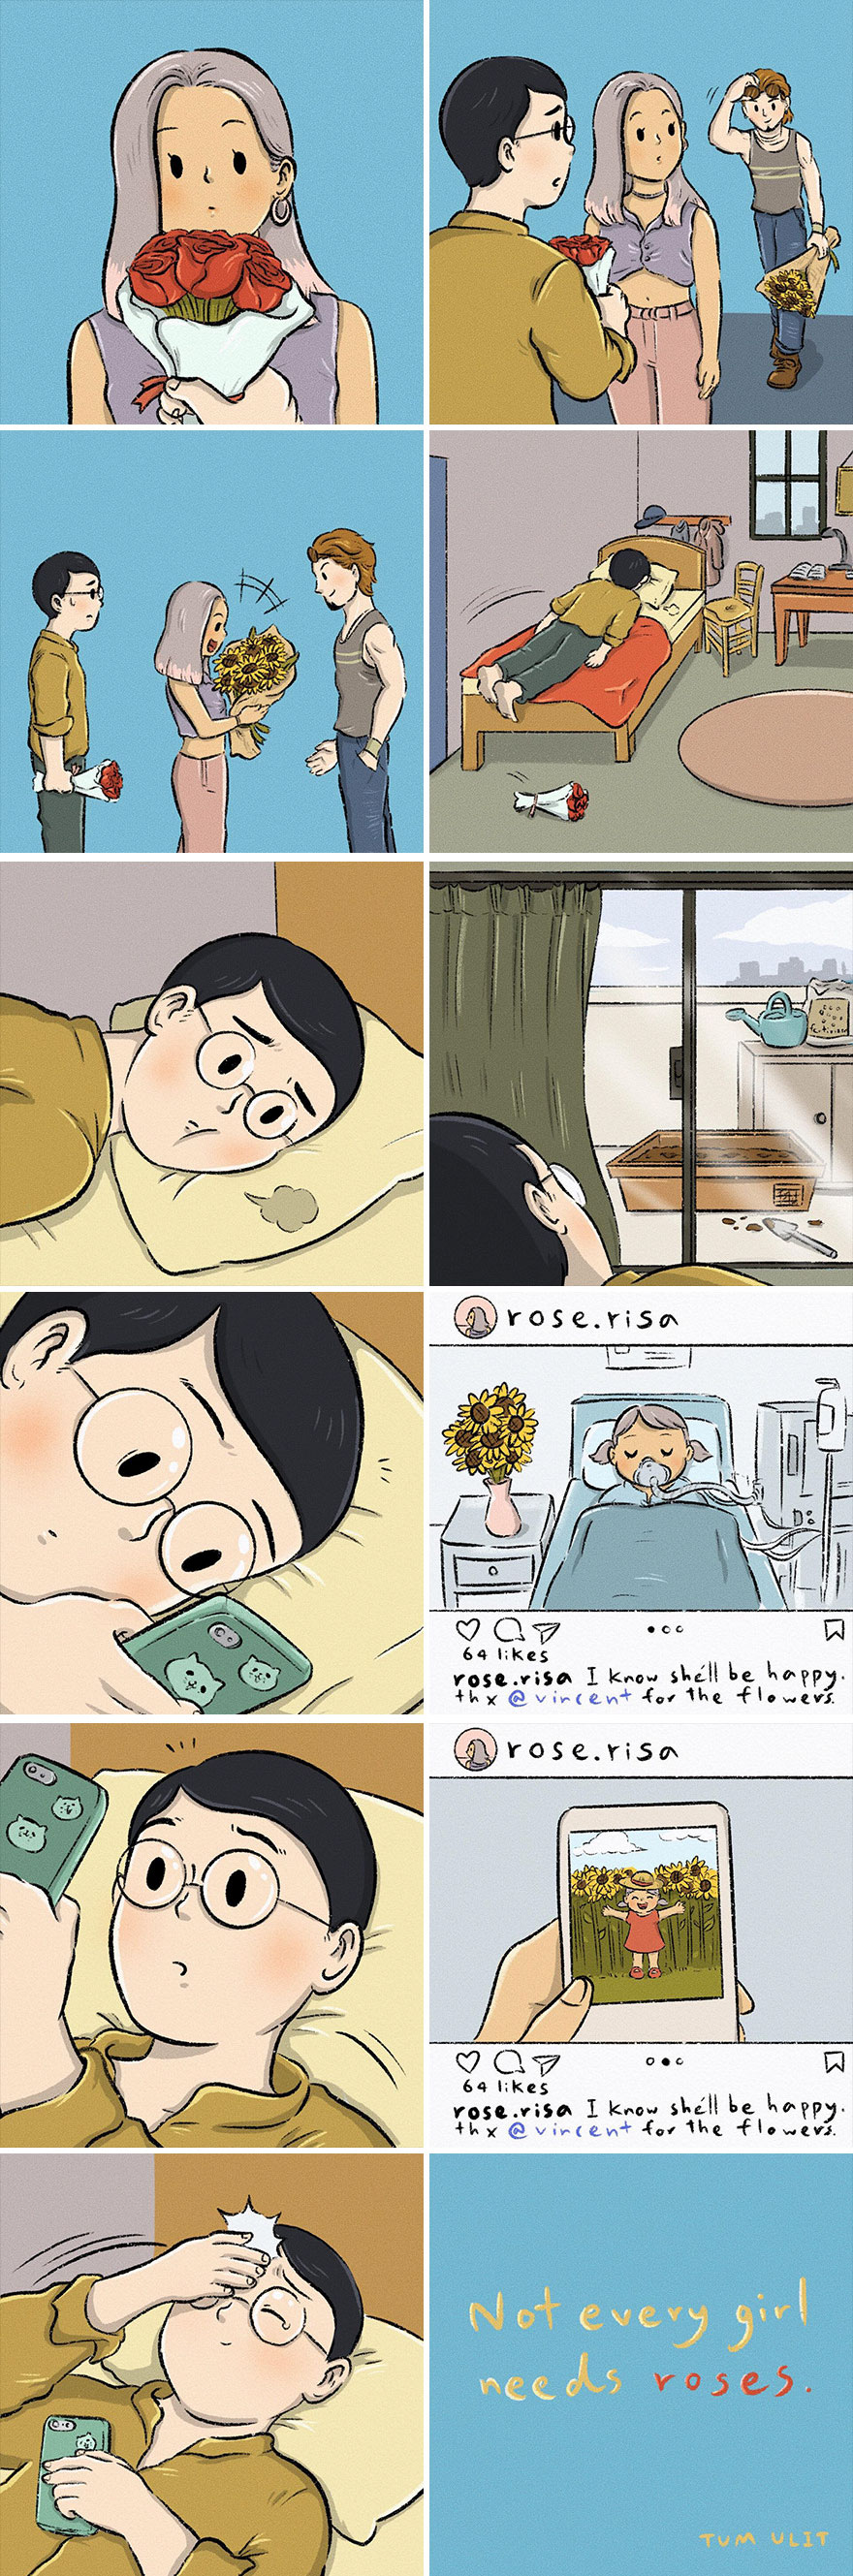 Thai Illustrator Makes Colorful Comics That Take Unexpected Turns And Here Are 18 Of The Best Ones